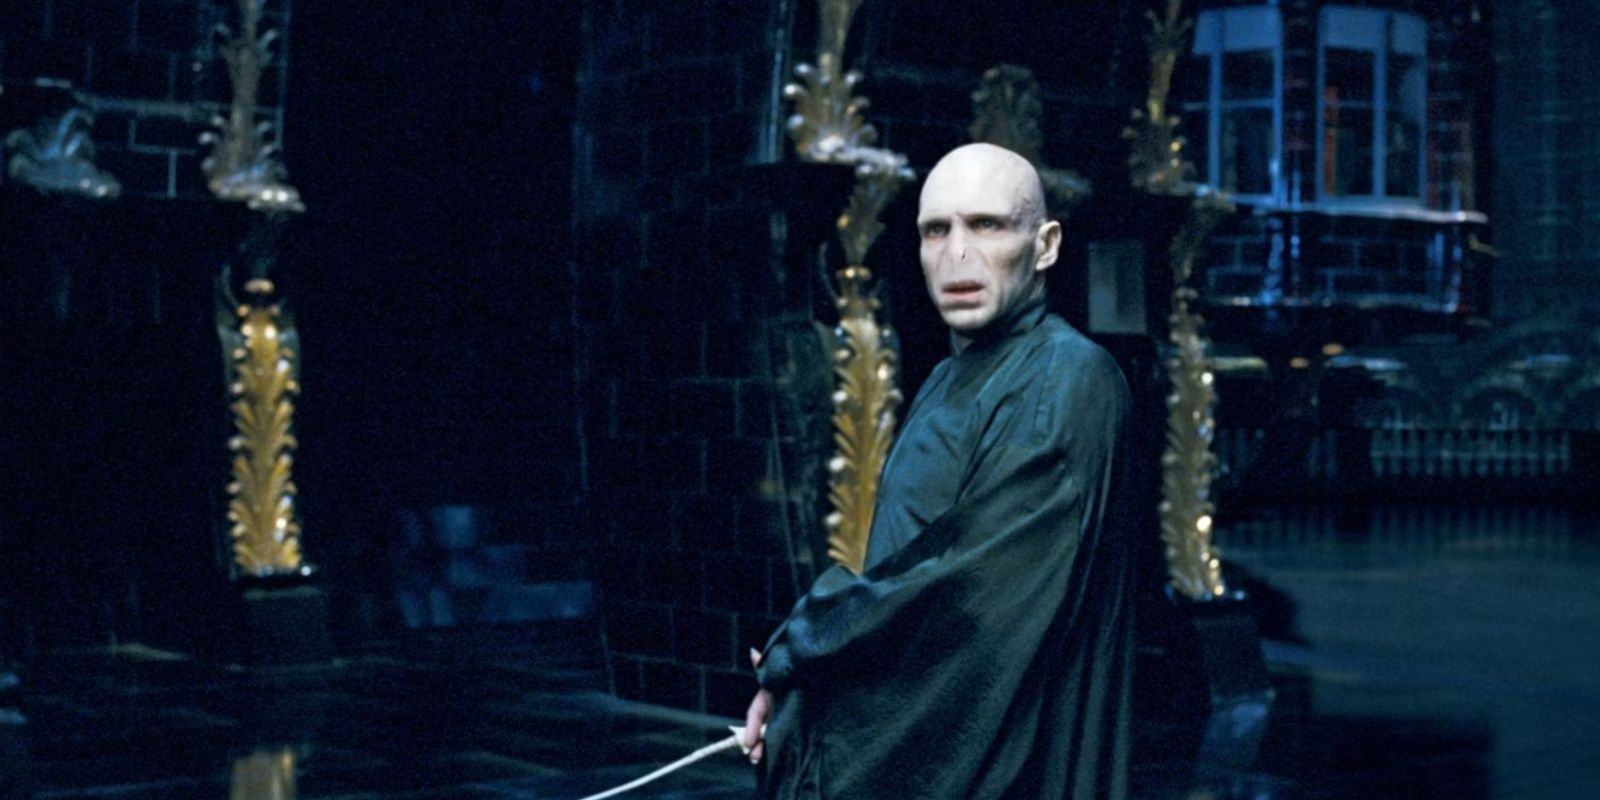 Ralph Fiennes as Voldemort in Harry Potter and the Order of the Phoenix